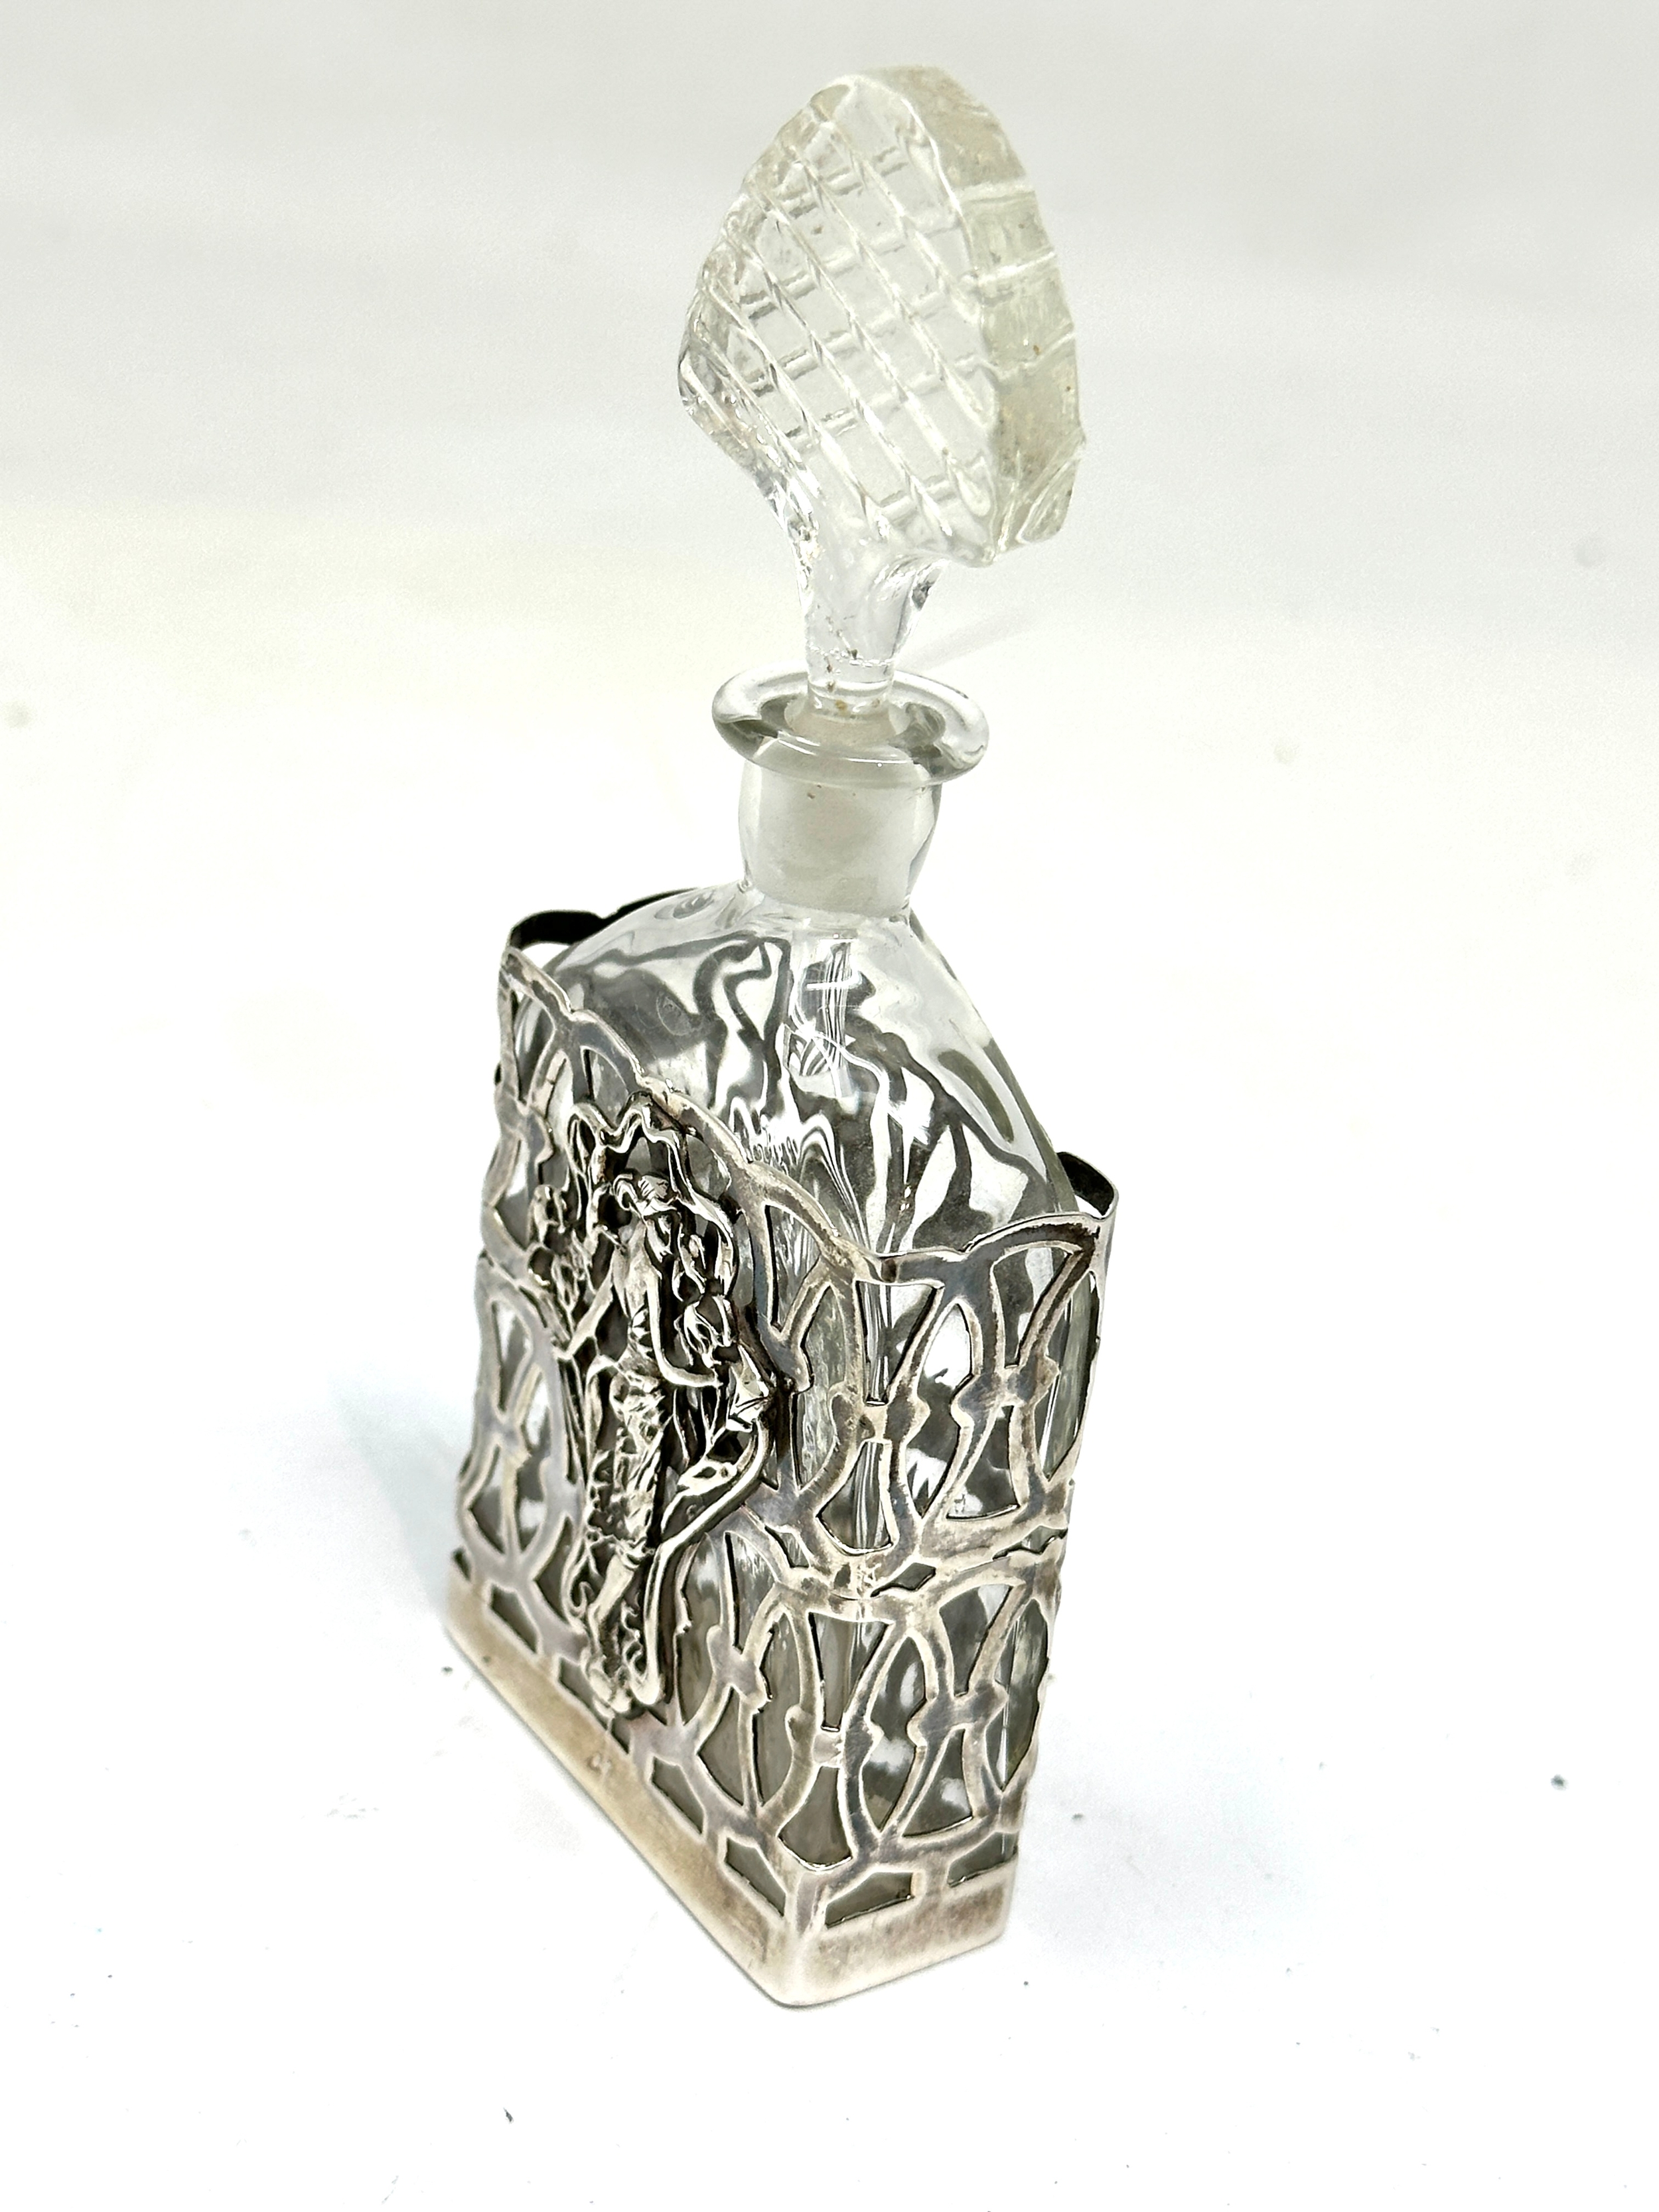 silver perfume bottle London silver hallmarks measures approx height 13cm - Image 2 of 5